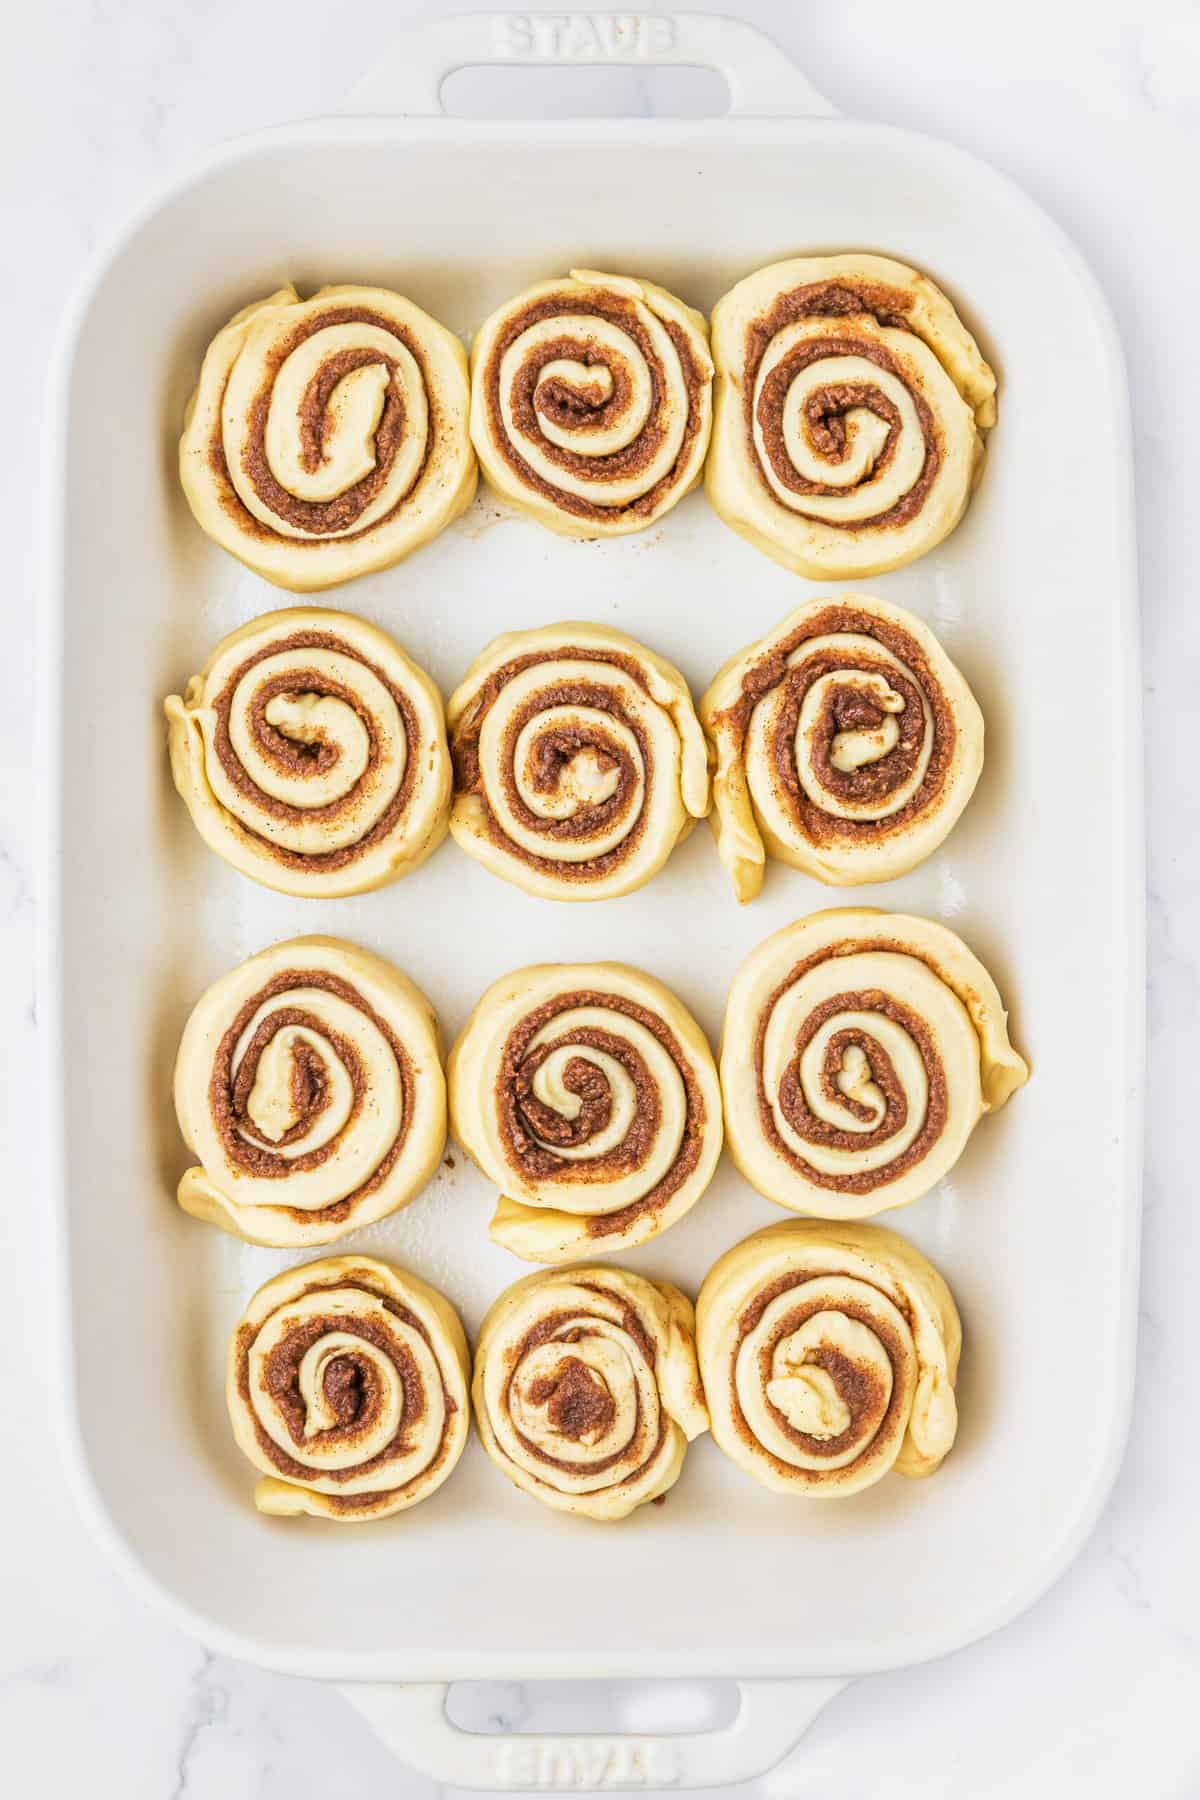 A dozen unbaked cinnamon rolls are placed in a white baking dish.